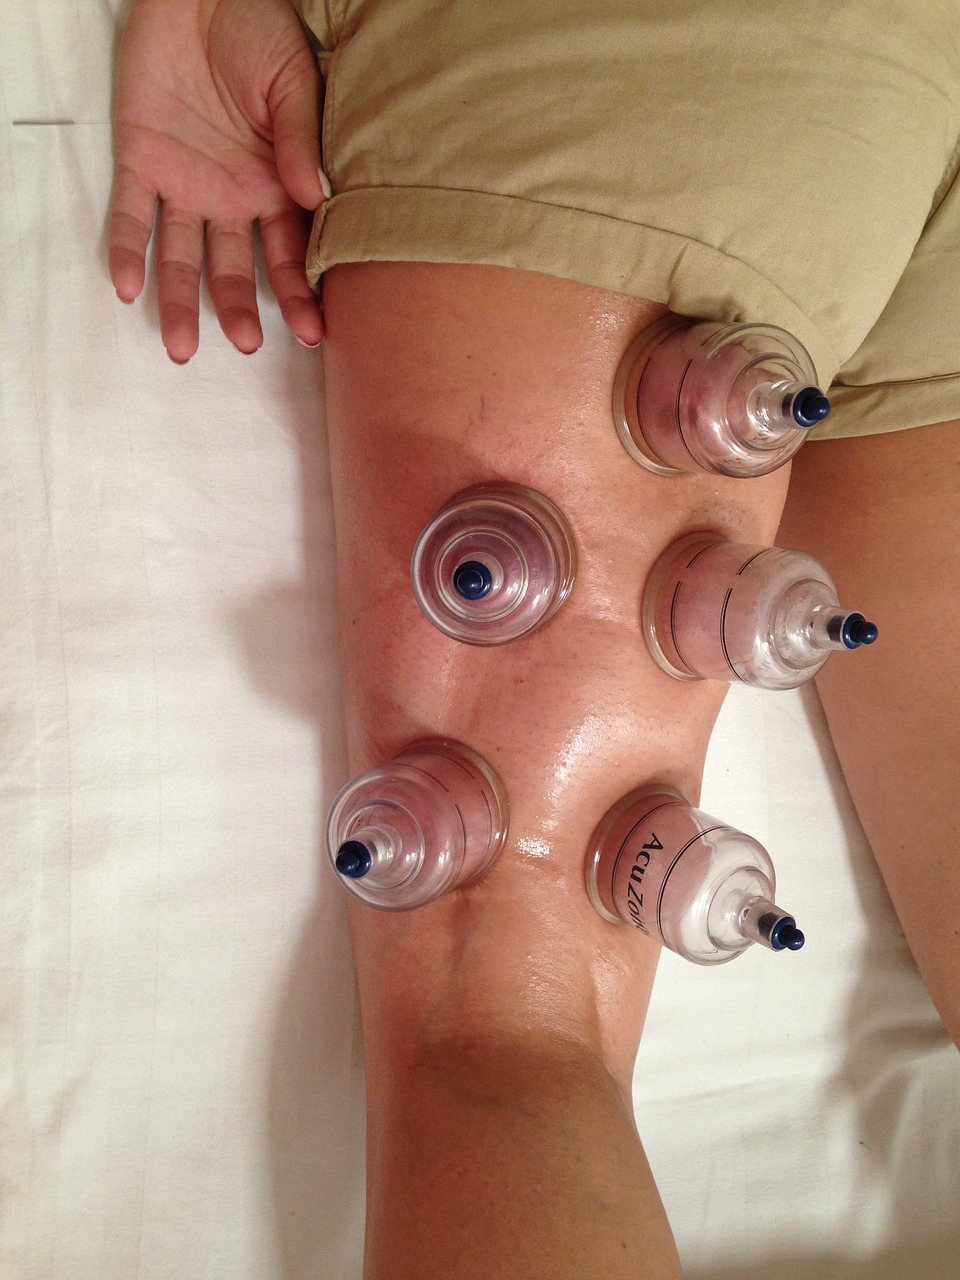 cupping acupuncture alternative free photo